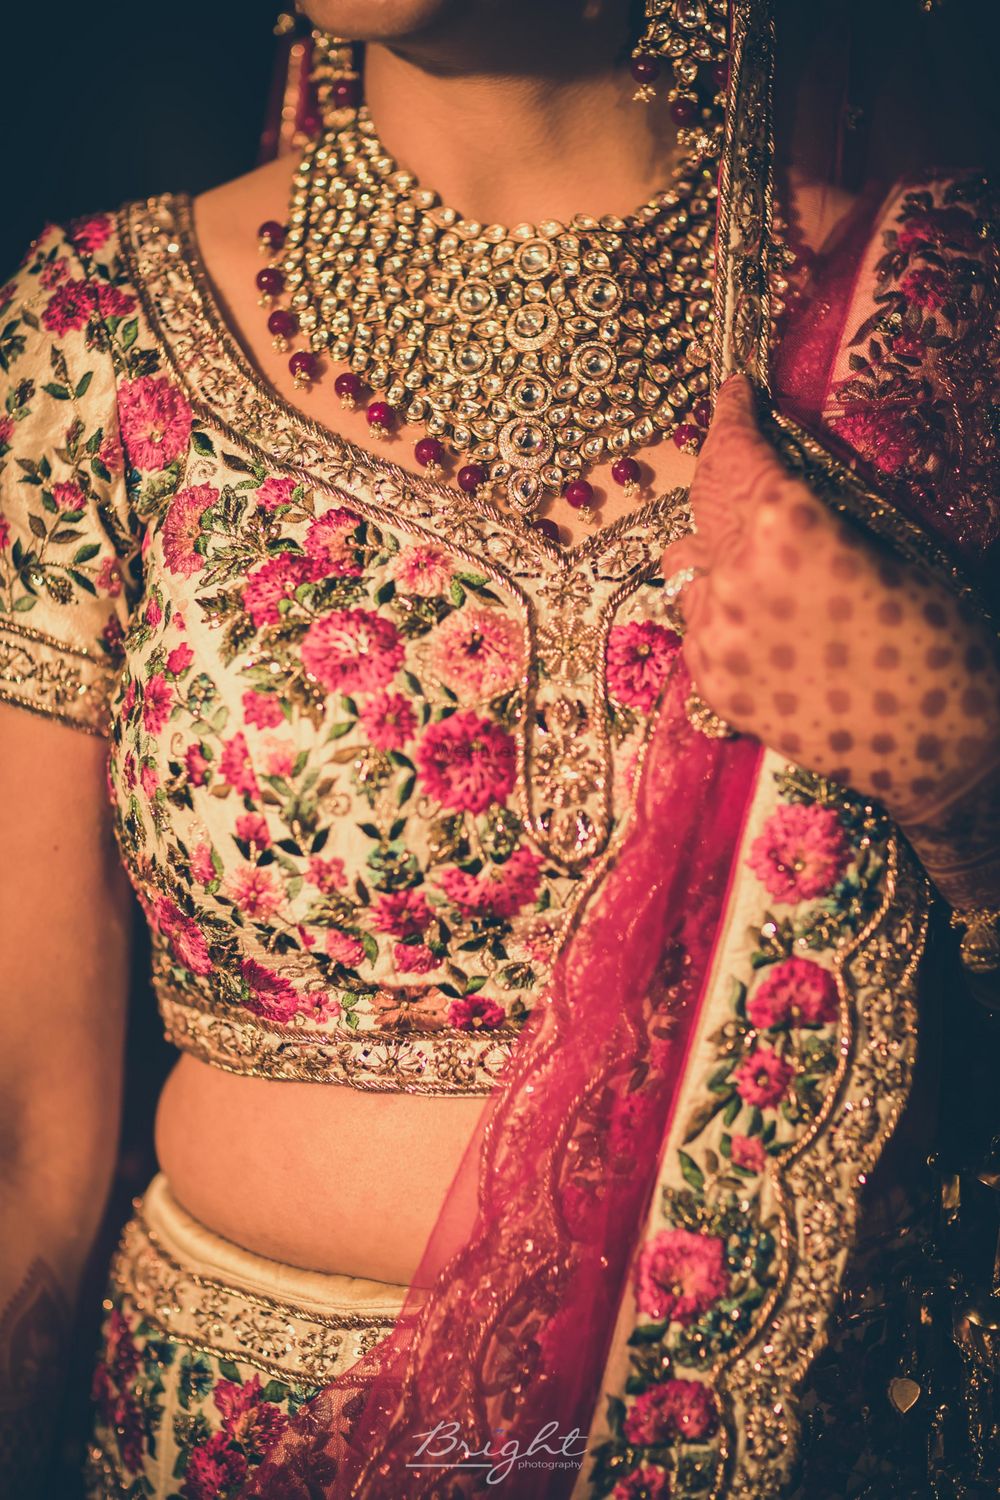 Photo of Elaborate bridal jewellery with floral embroidery lehenga